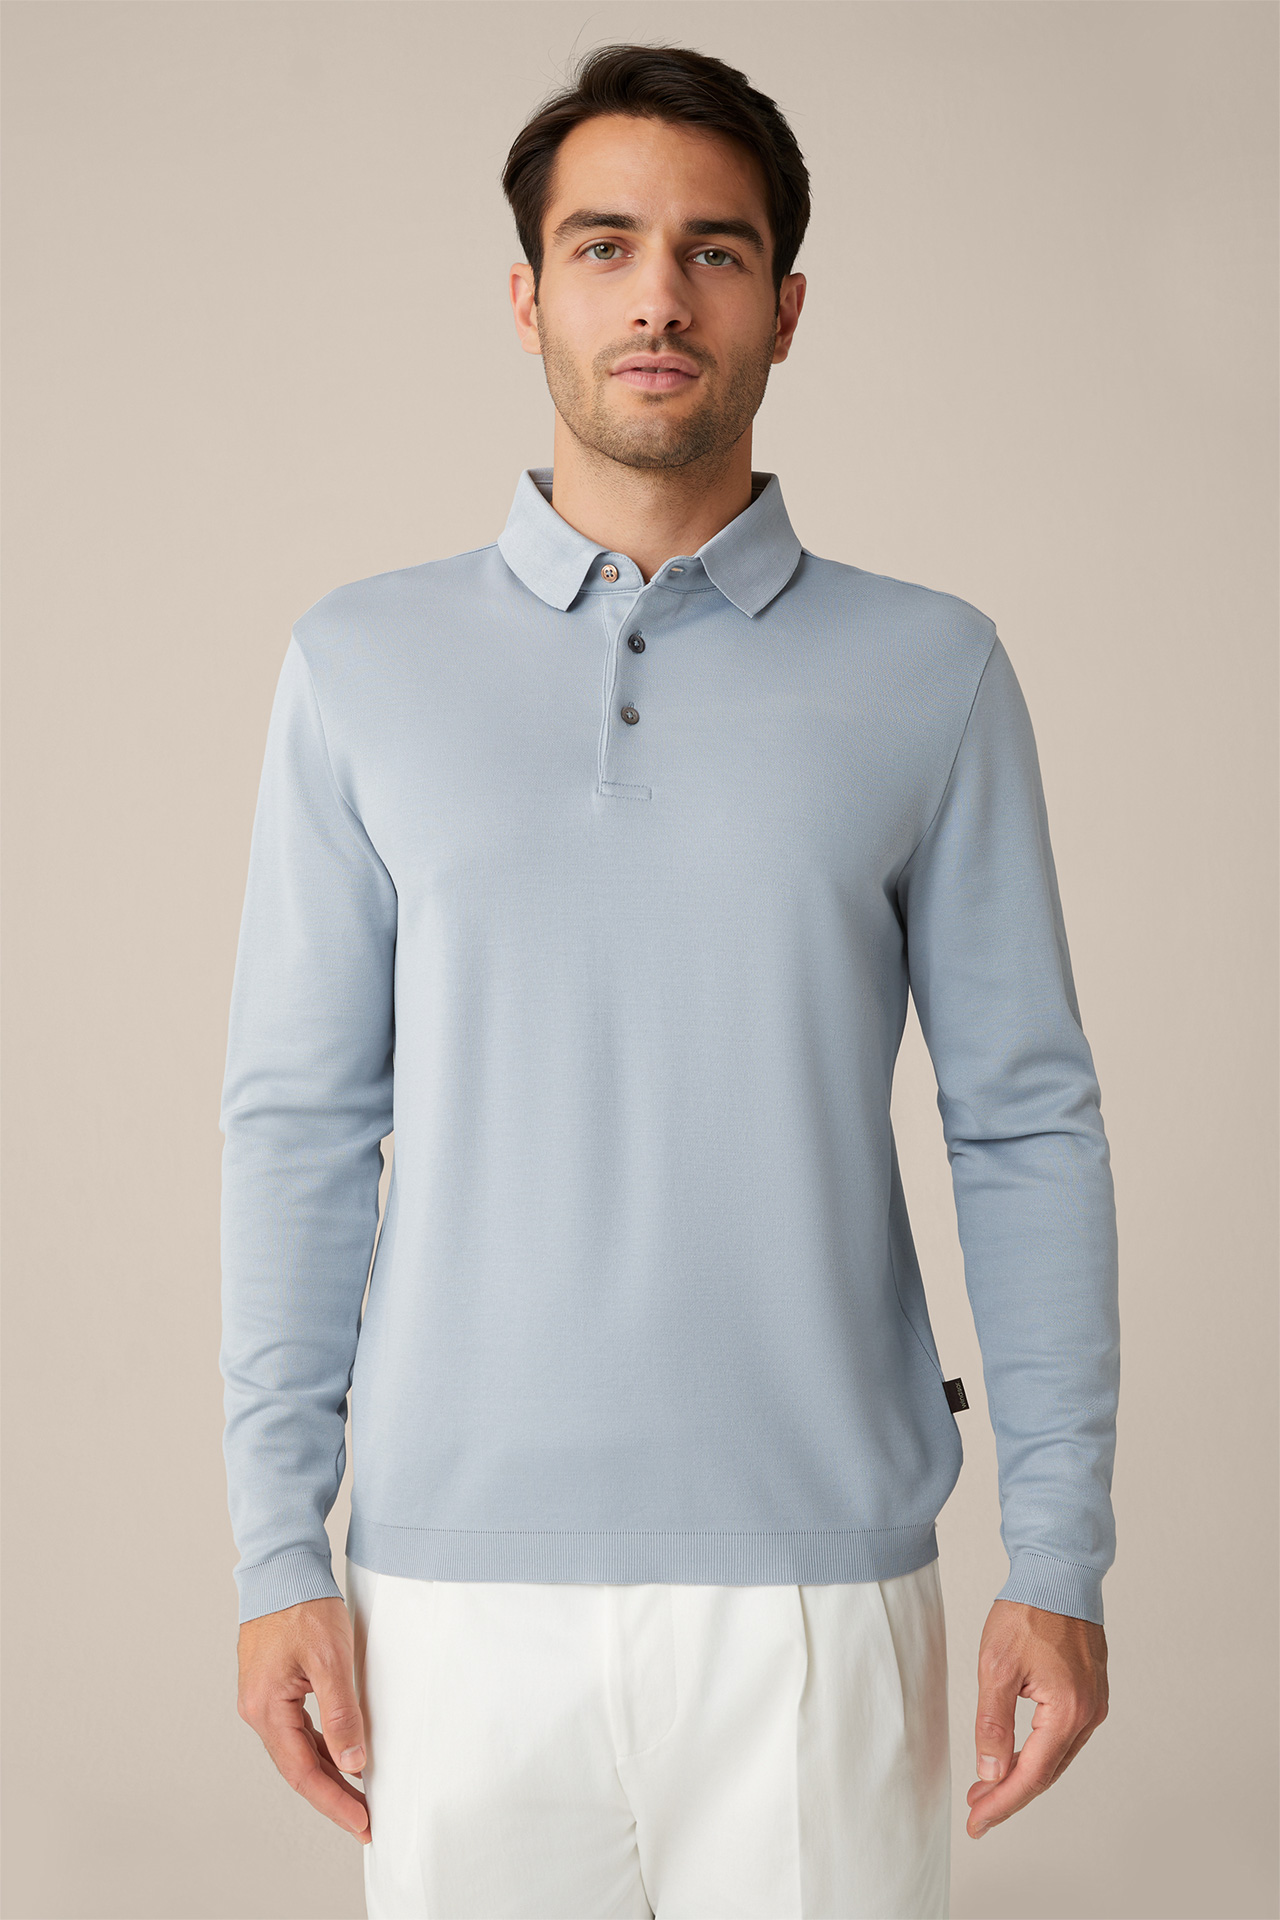 Frido Long-sleeved Cotton Polo Shirt in Blue and Grey